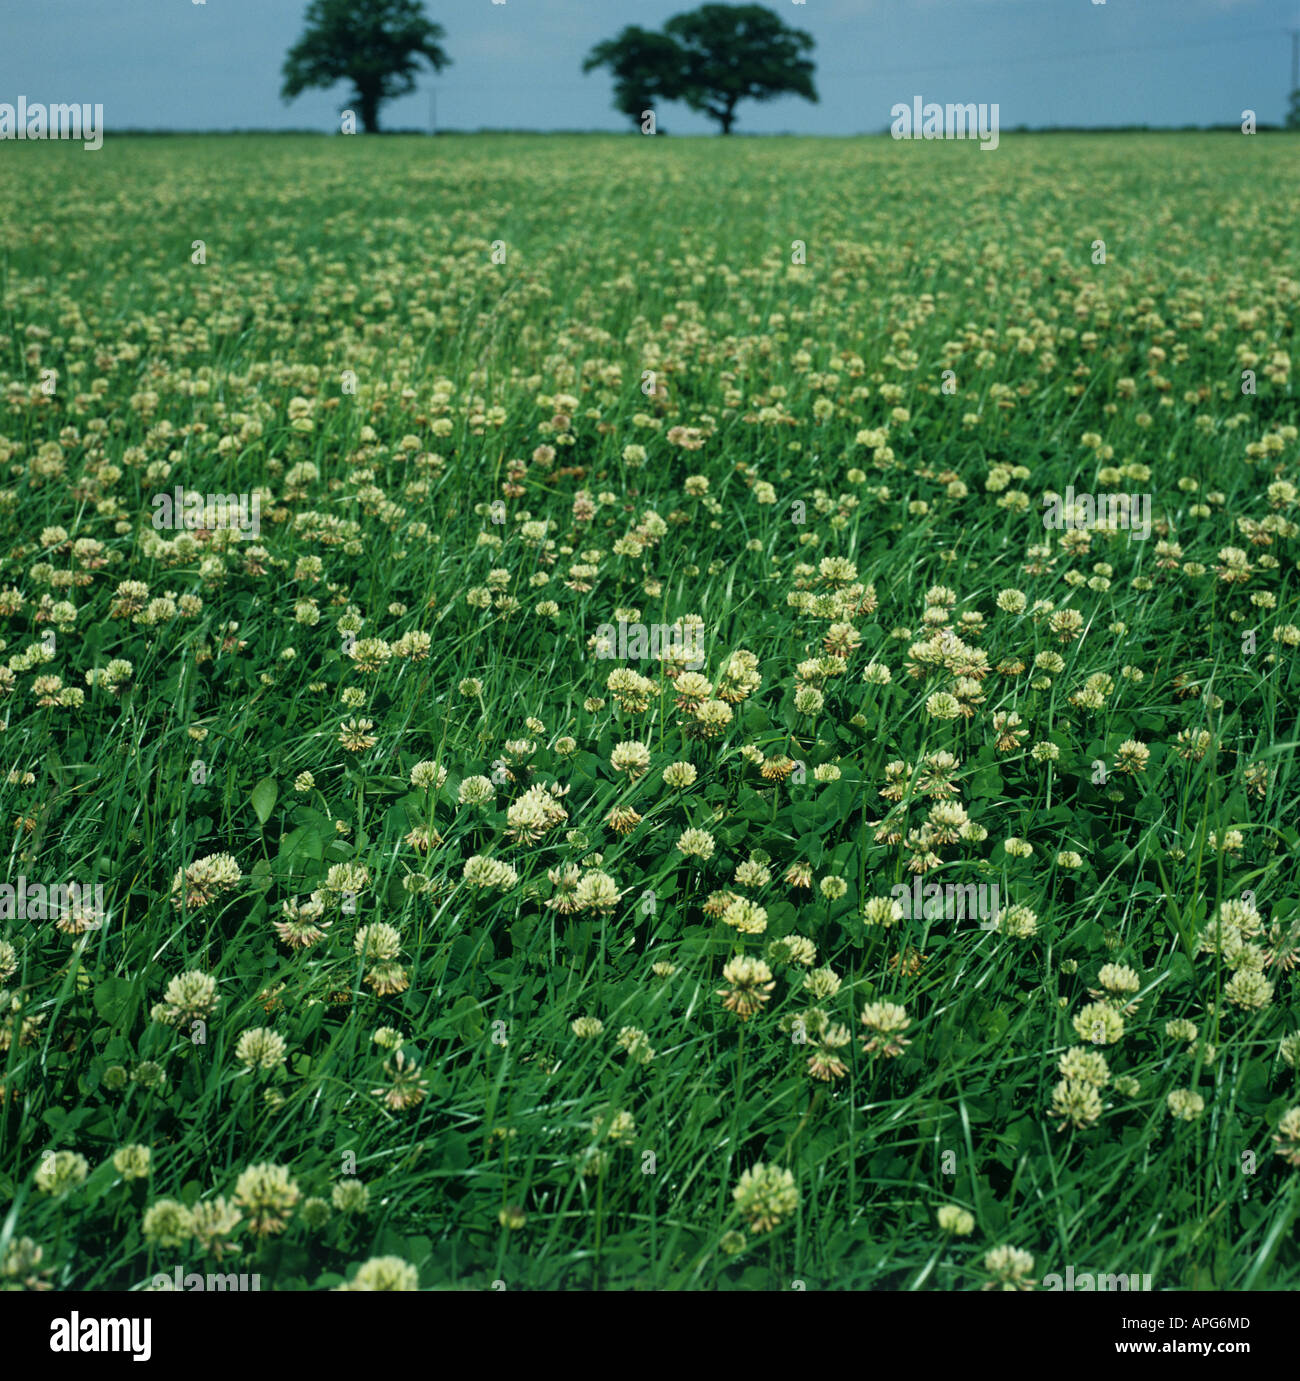 White clover flowering in a grass ley clover mixture Stock Photo